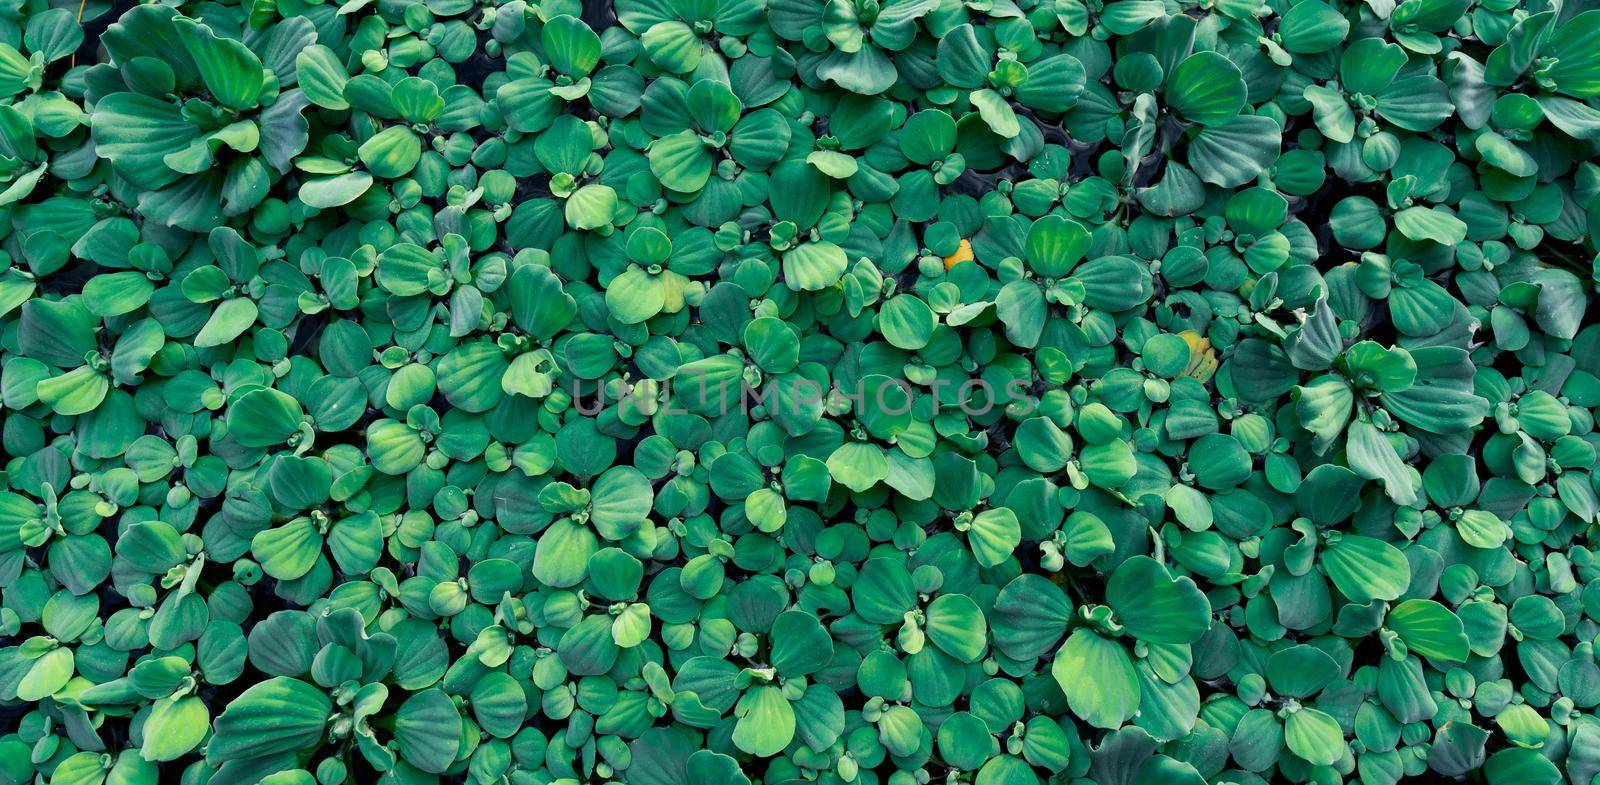 Top view green leaves of water lettuce floating on water surface. Pistia stratiotes or water lettuce is aquatic plant. Invasive species. Closeup leaf of water lettuce pond plants. Nature banner.